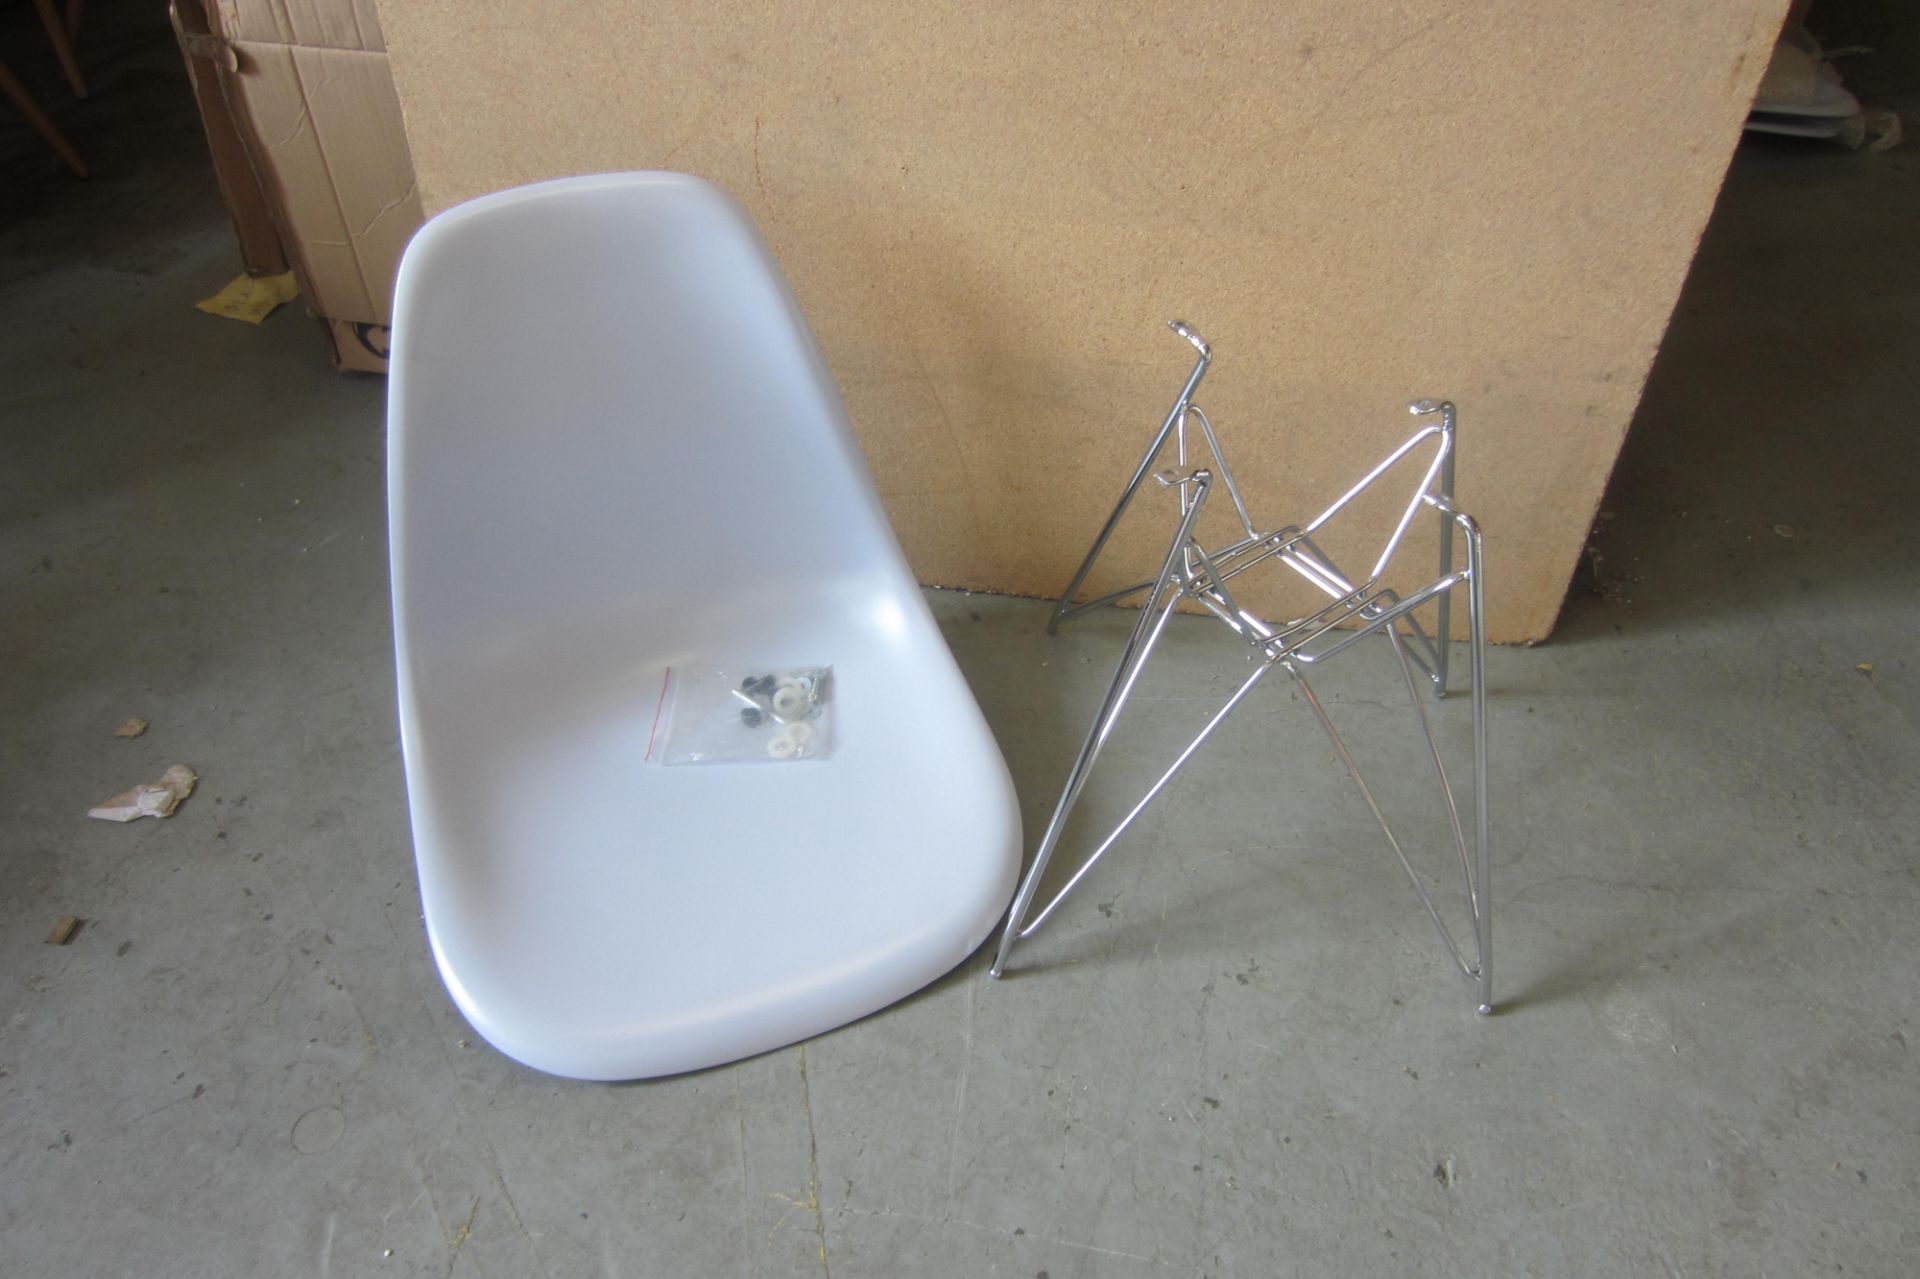 As New/Unassembled: Pale Blue/Grey DSW Chair in Charles Eames Style with Wire Metal Base.